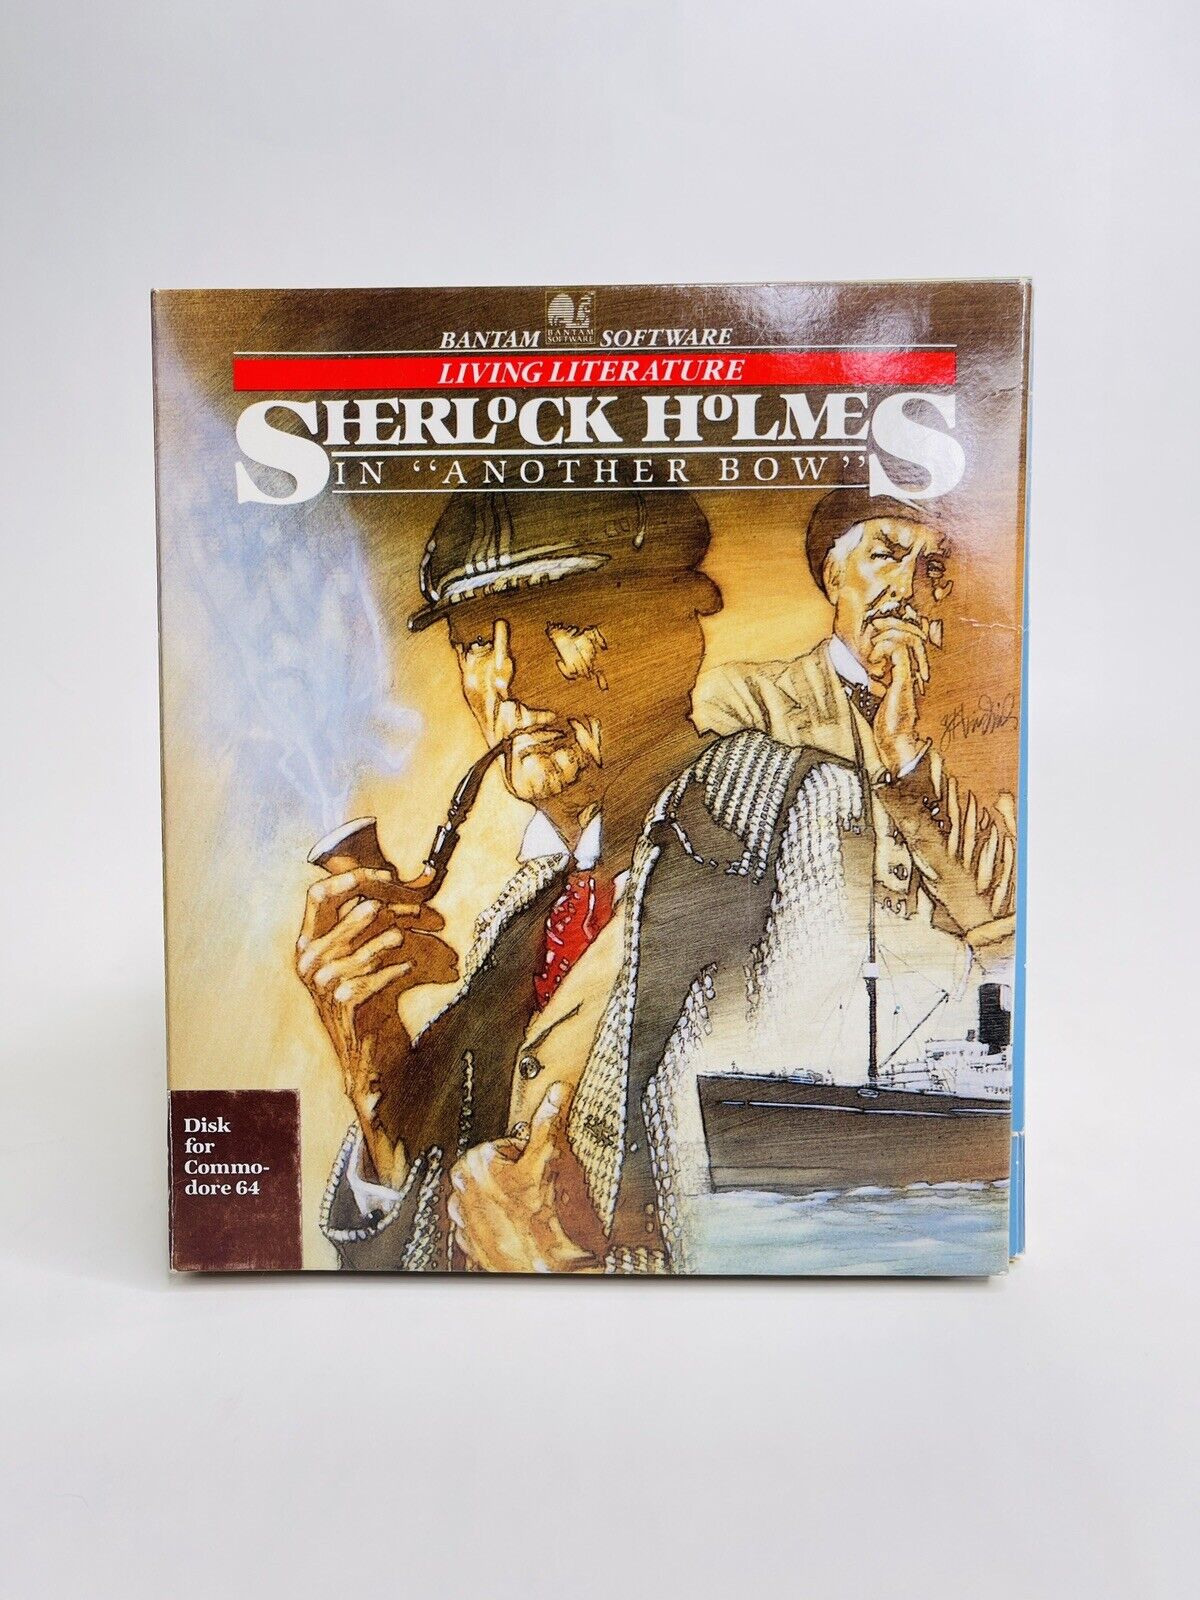 Sherlock Holmes in Another Bow - Commodore 64 Vintage Game - CIB Complete RARE